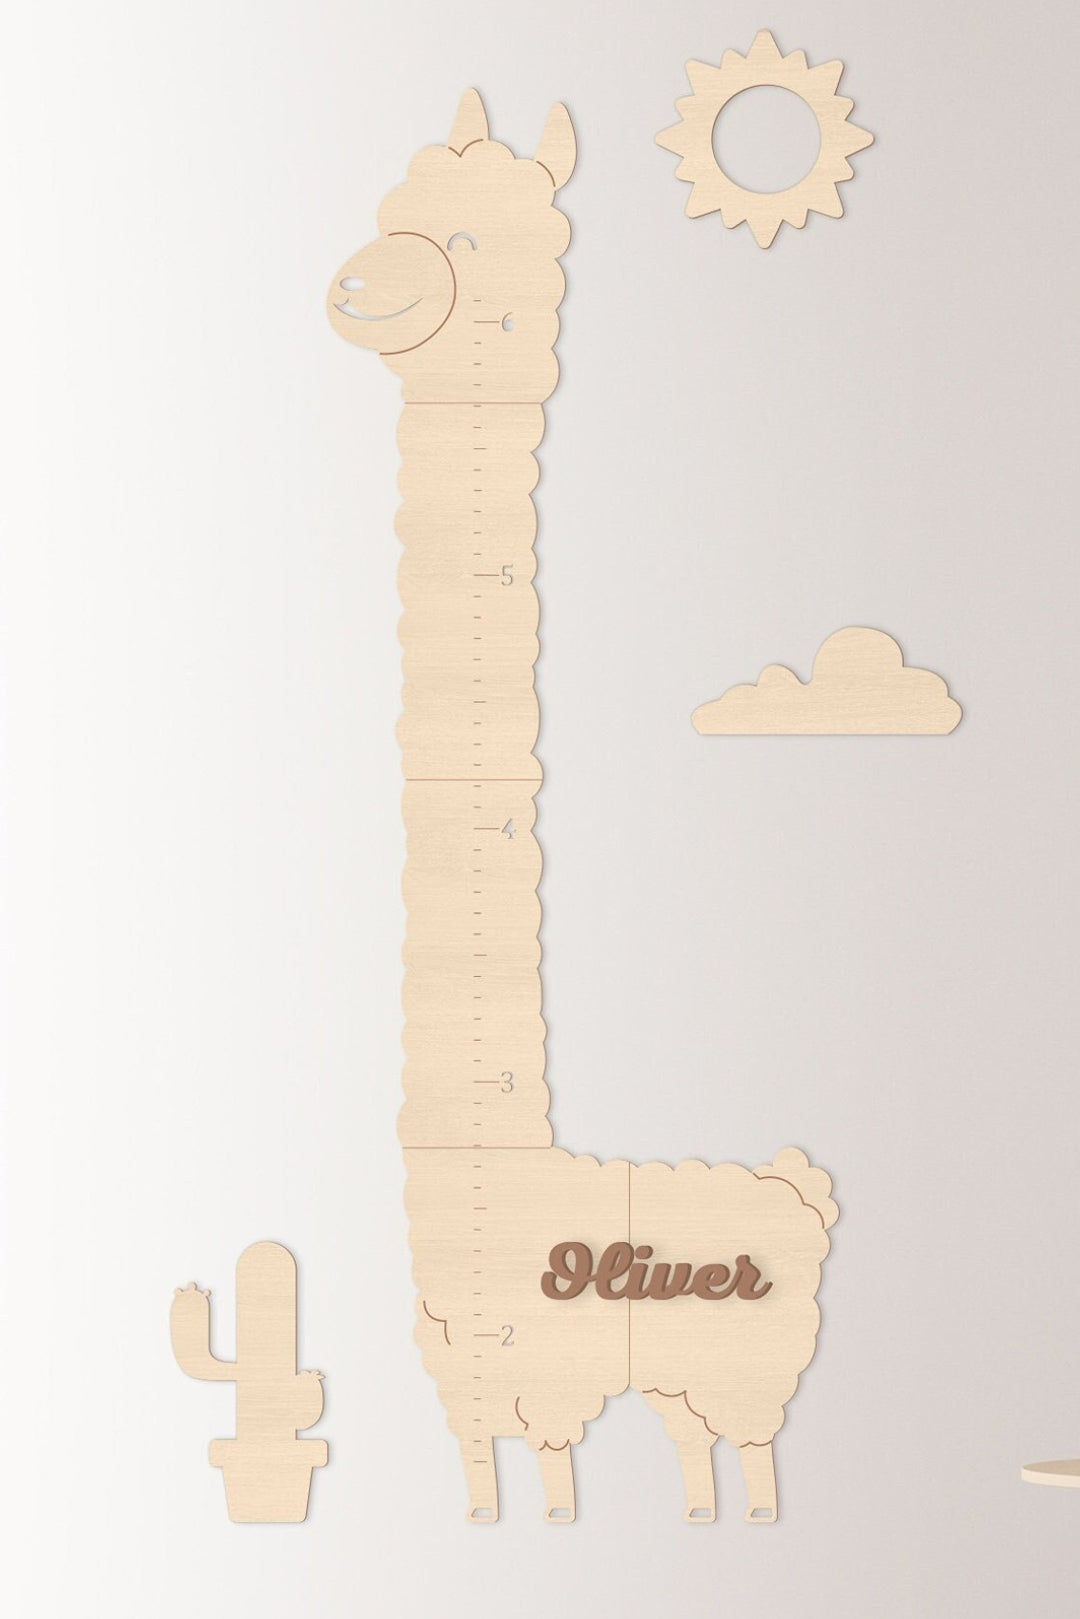 Personalized Wooden Baby Growth Height Chart - Alpaca